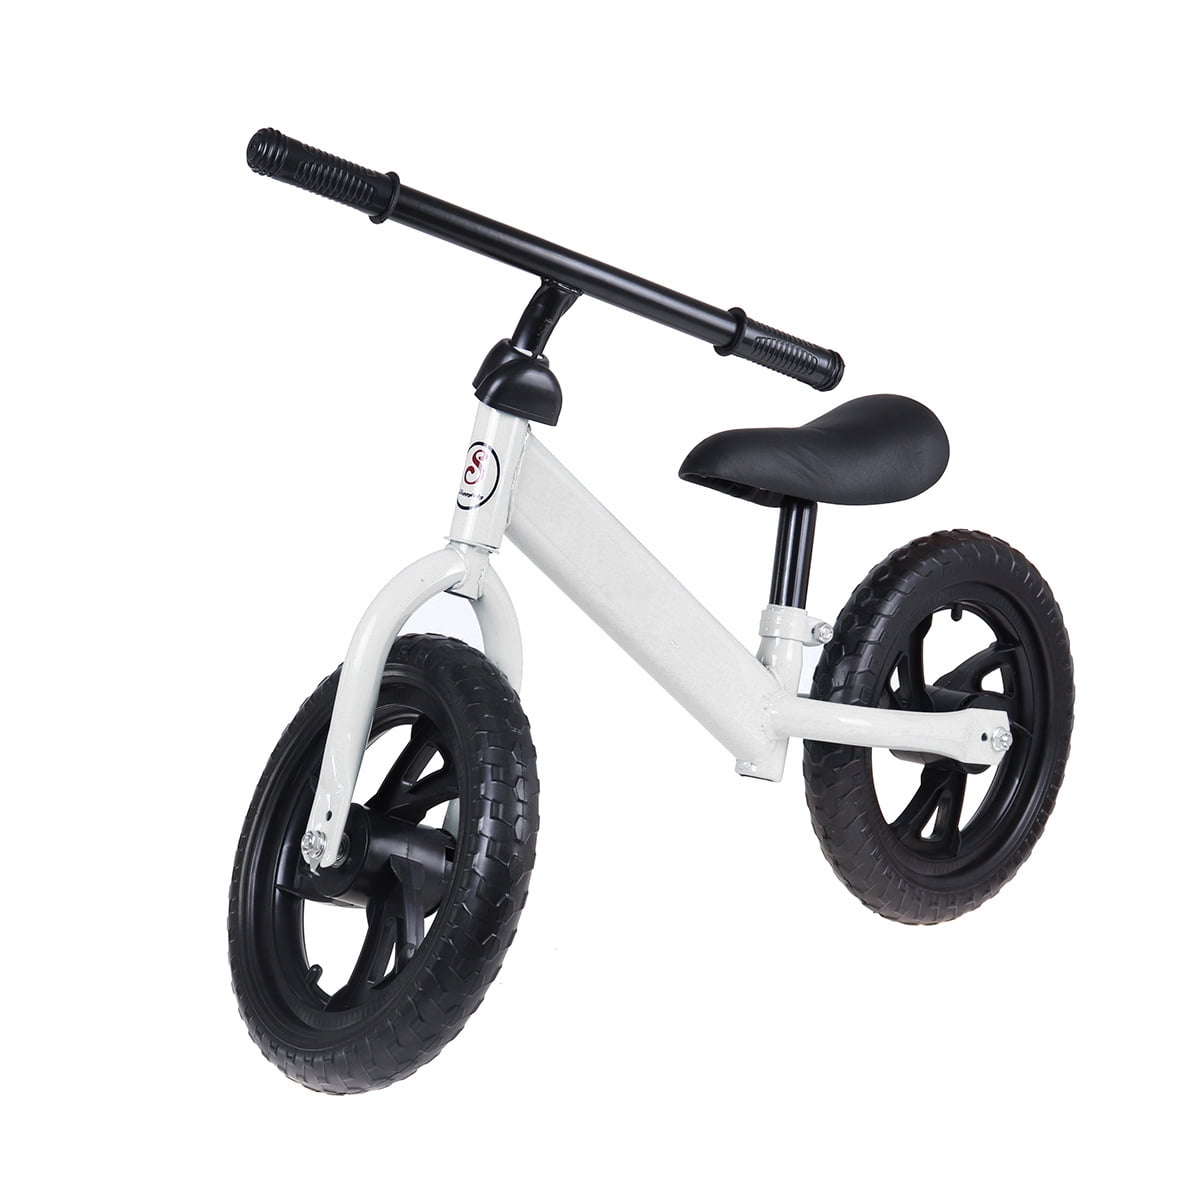 Black For Parts Ages 2 to 5 Glide Bikes 12 Inch Kids Balance Bike Bicycle 